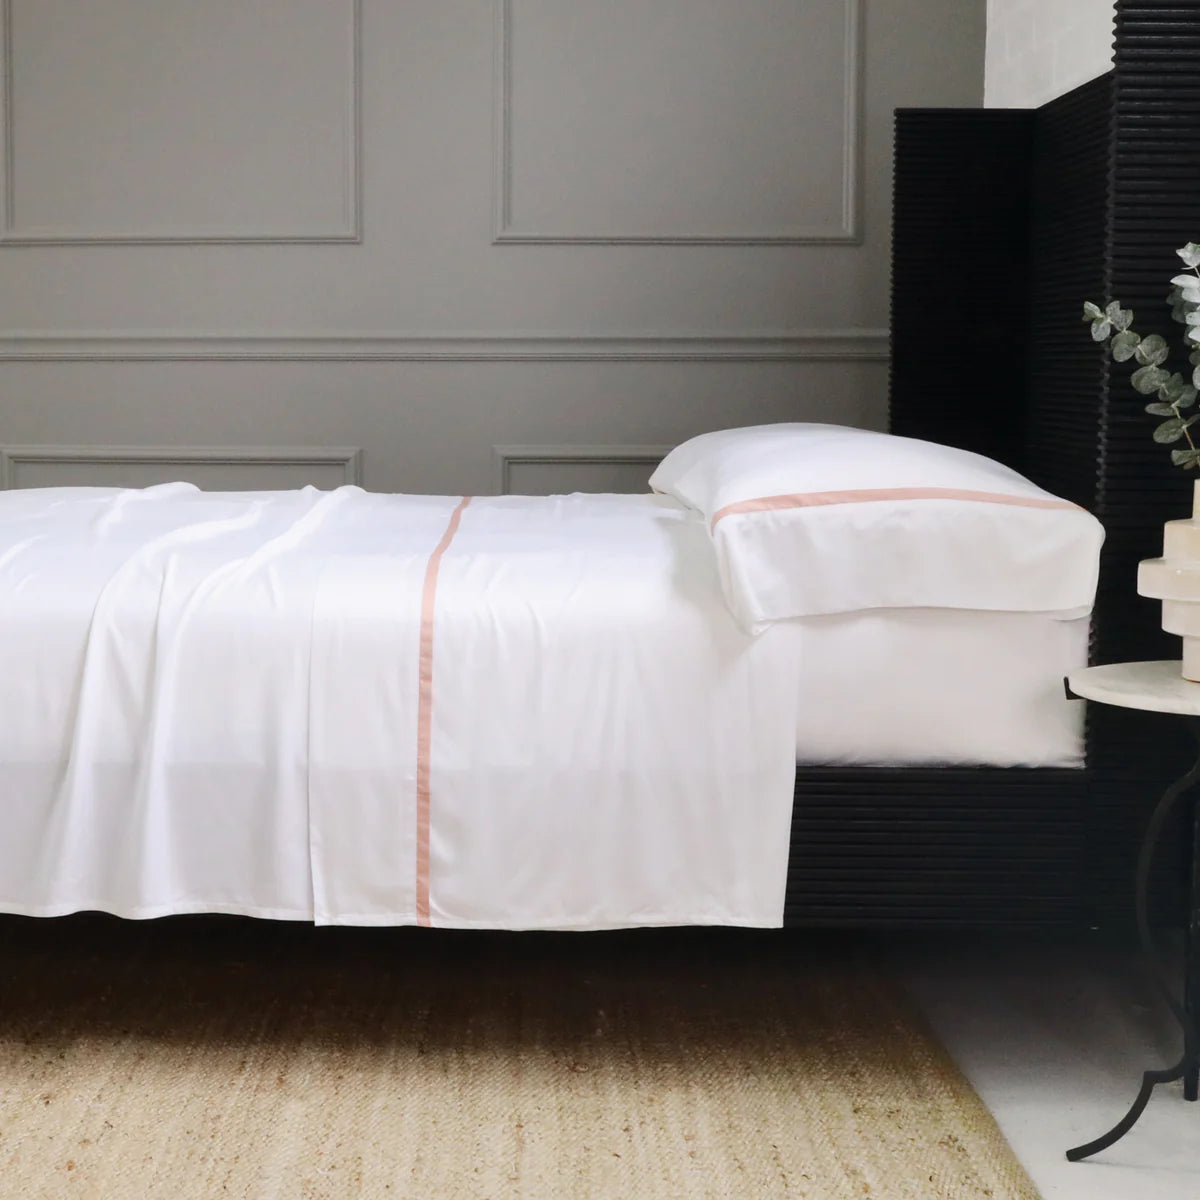 Langston Bamboo Sateen Sheet Set by Pom Pom at Home